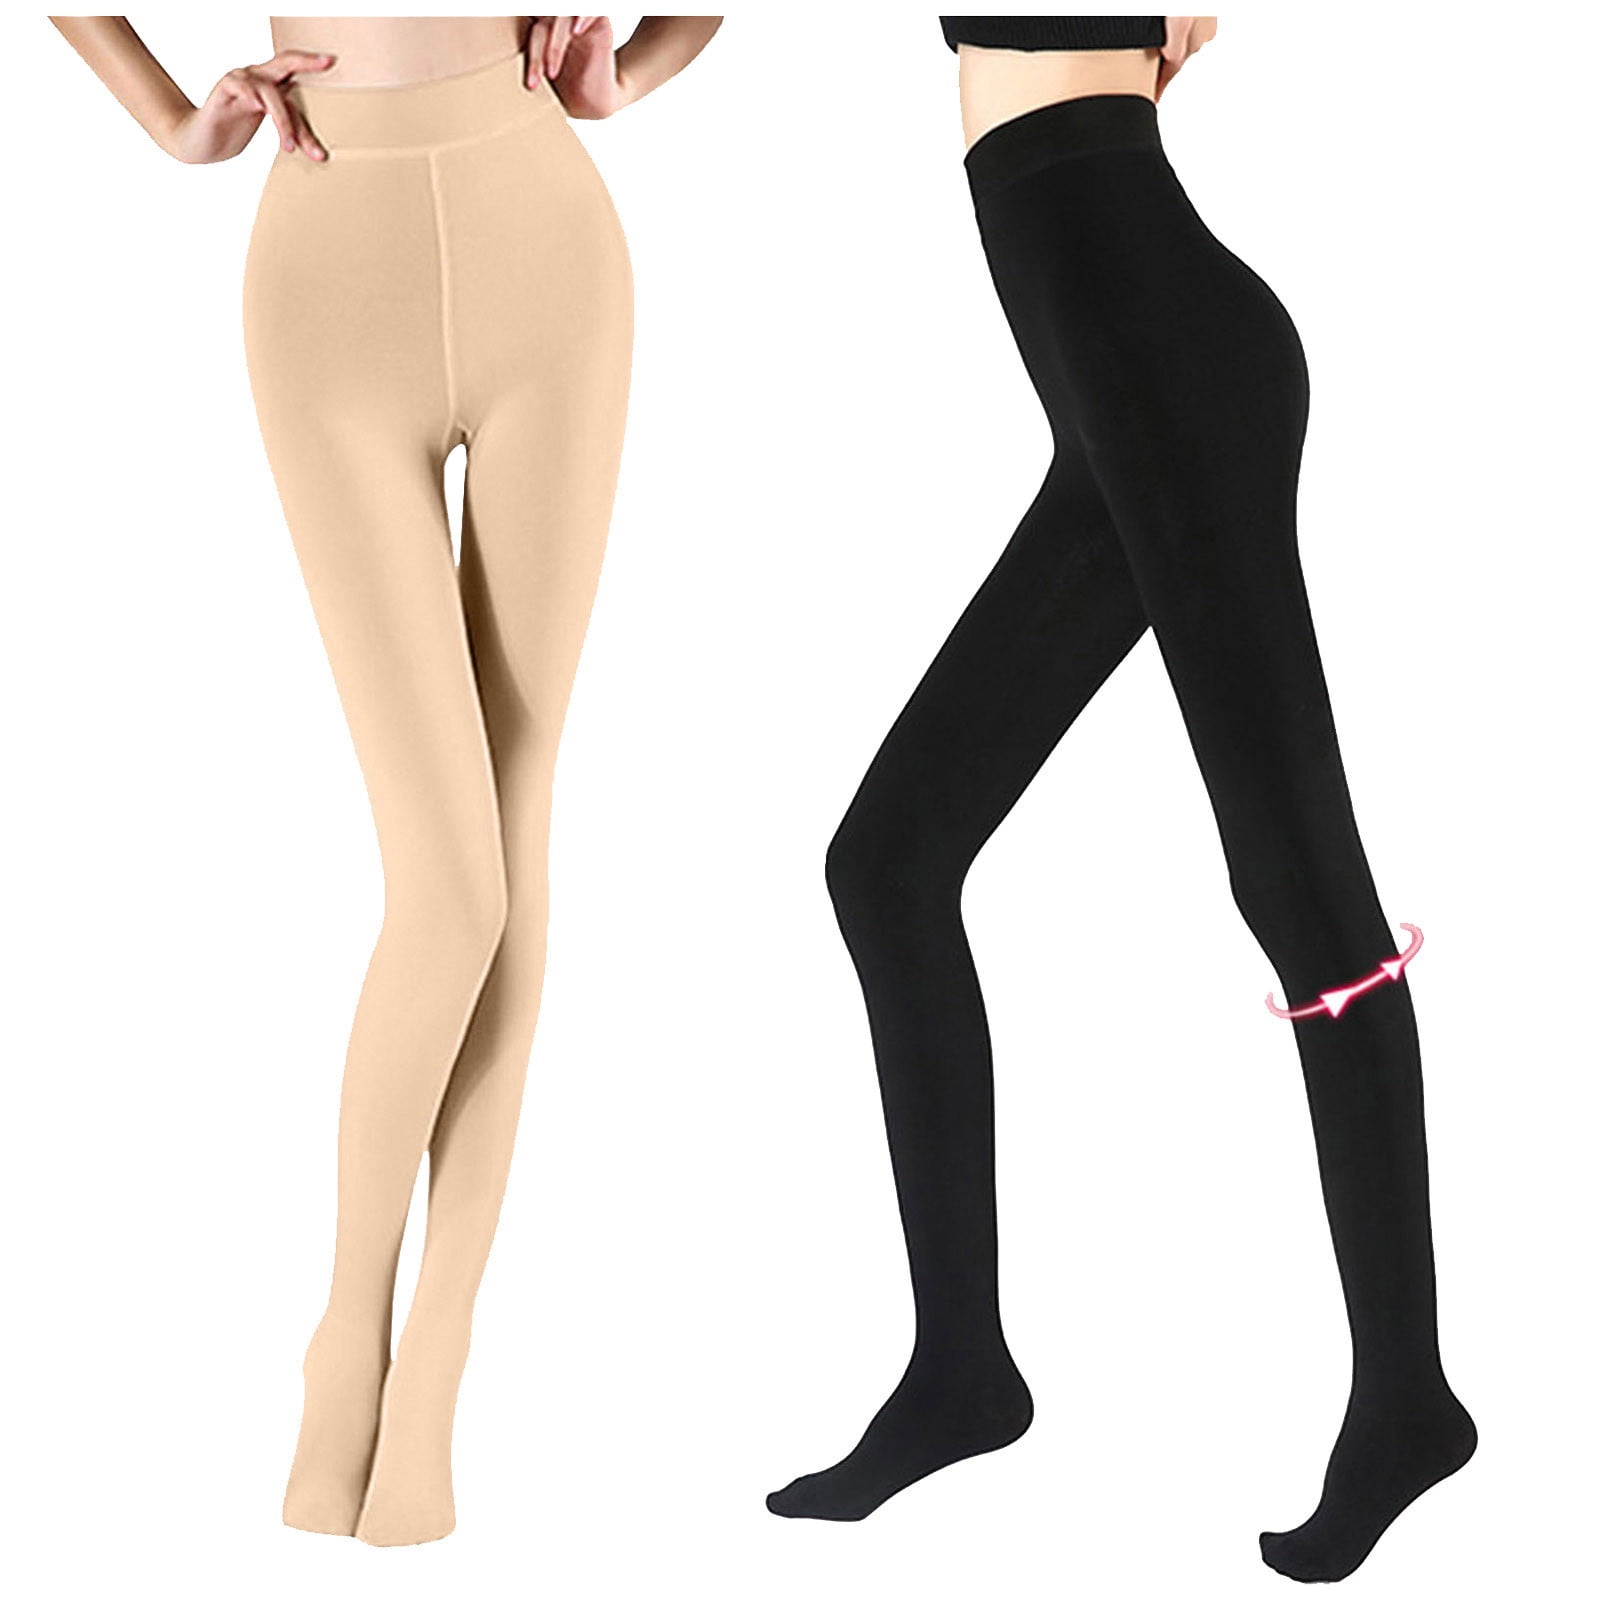 2 Pairs Tights for Women Winter Thermal Pantyhose High Waist Stockings Warm  Opaque Fleece Lined Leggings Ladies Clothes 